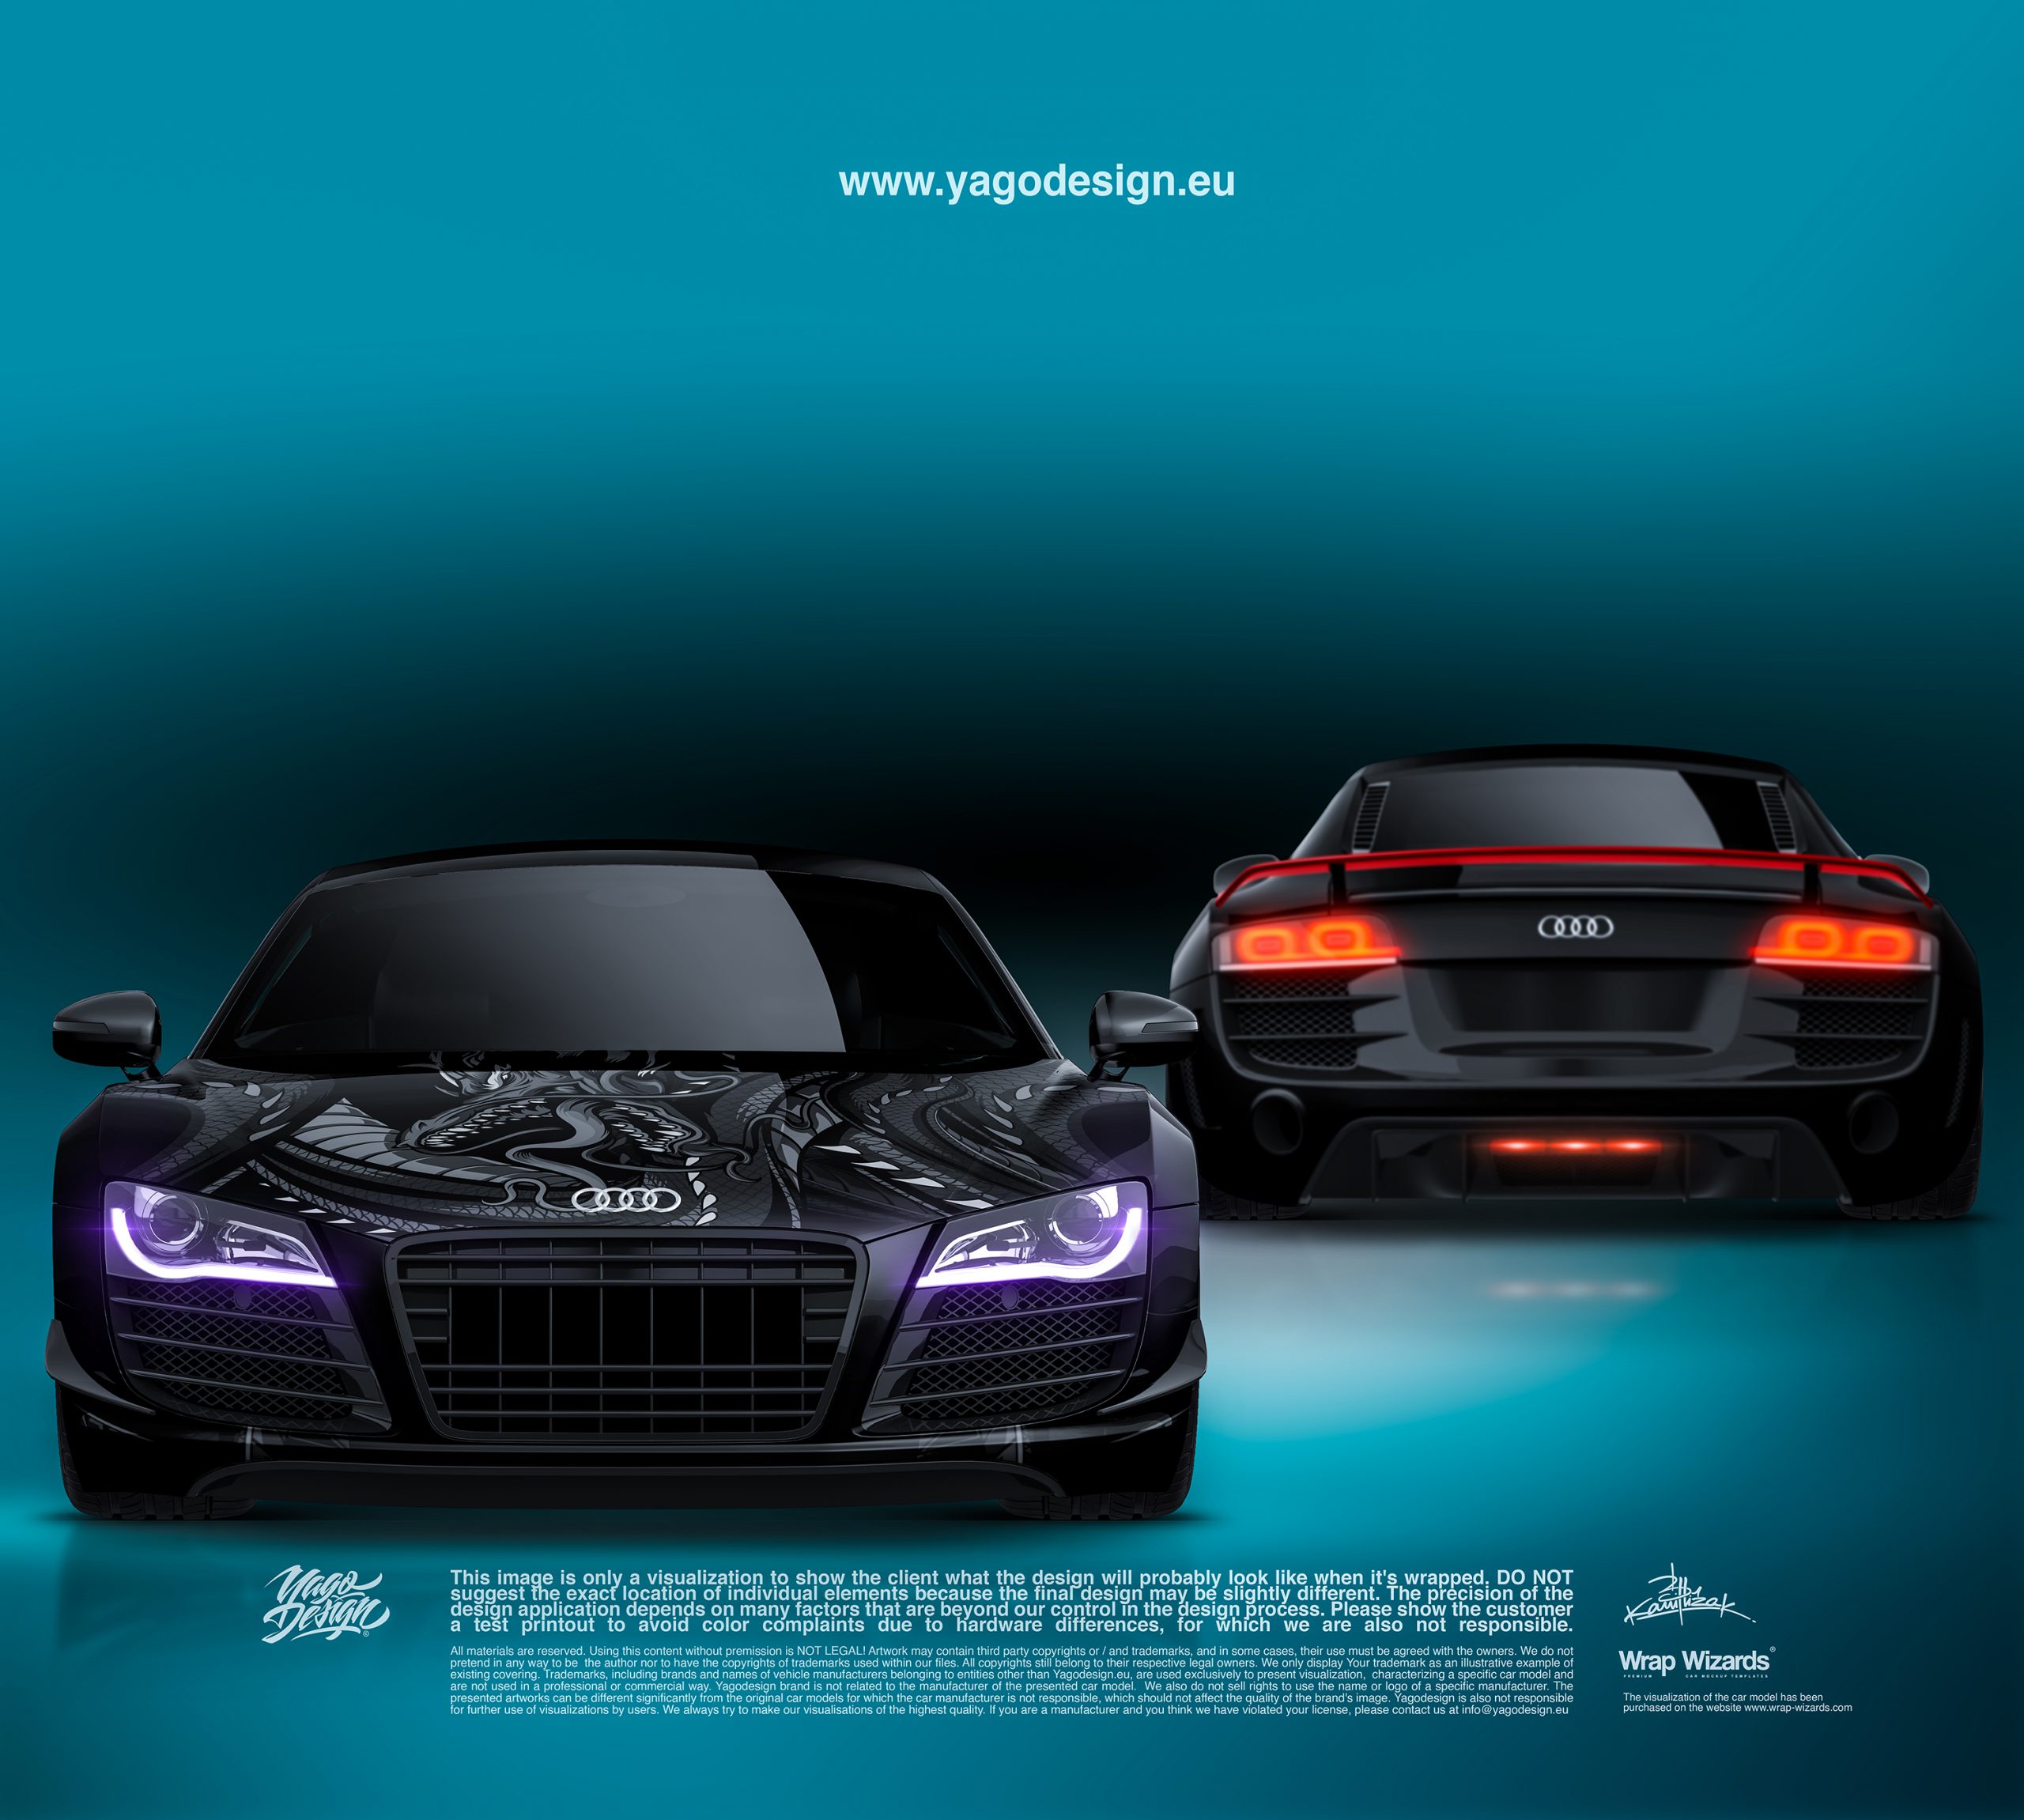 RONIN-DESING-ON-AUDI-R8-BY-YAGODESIGN-FRONT-AND-REAR-3000